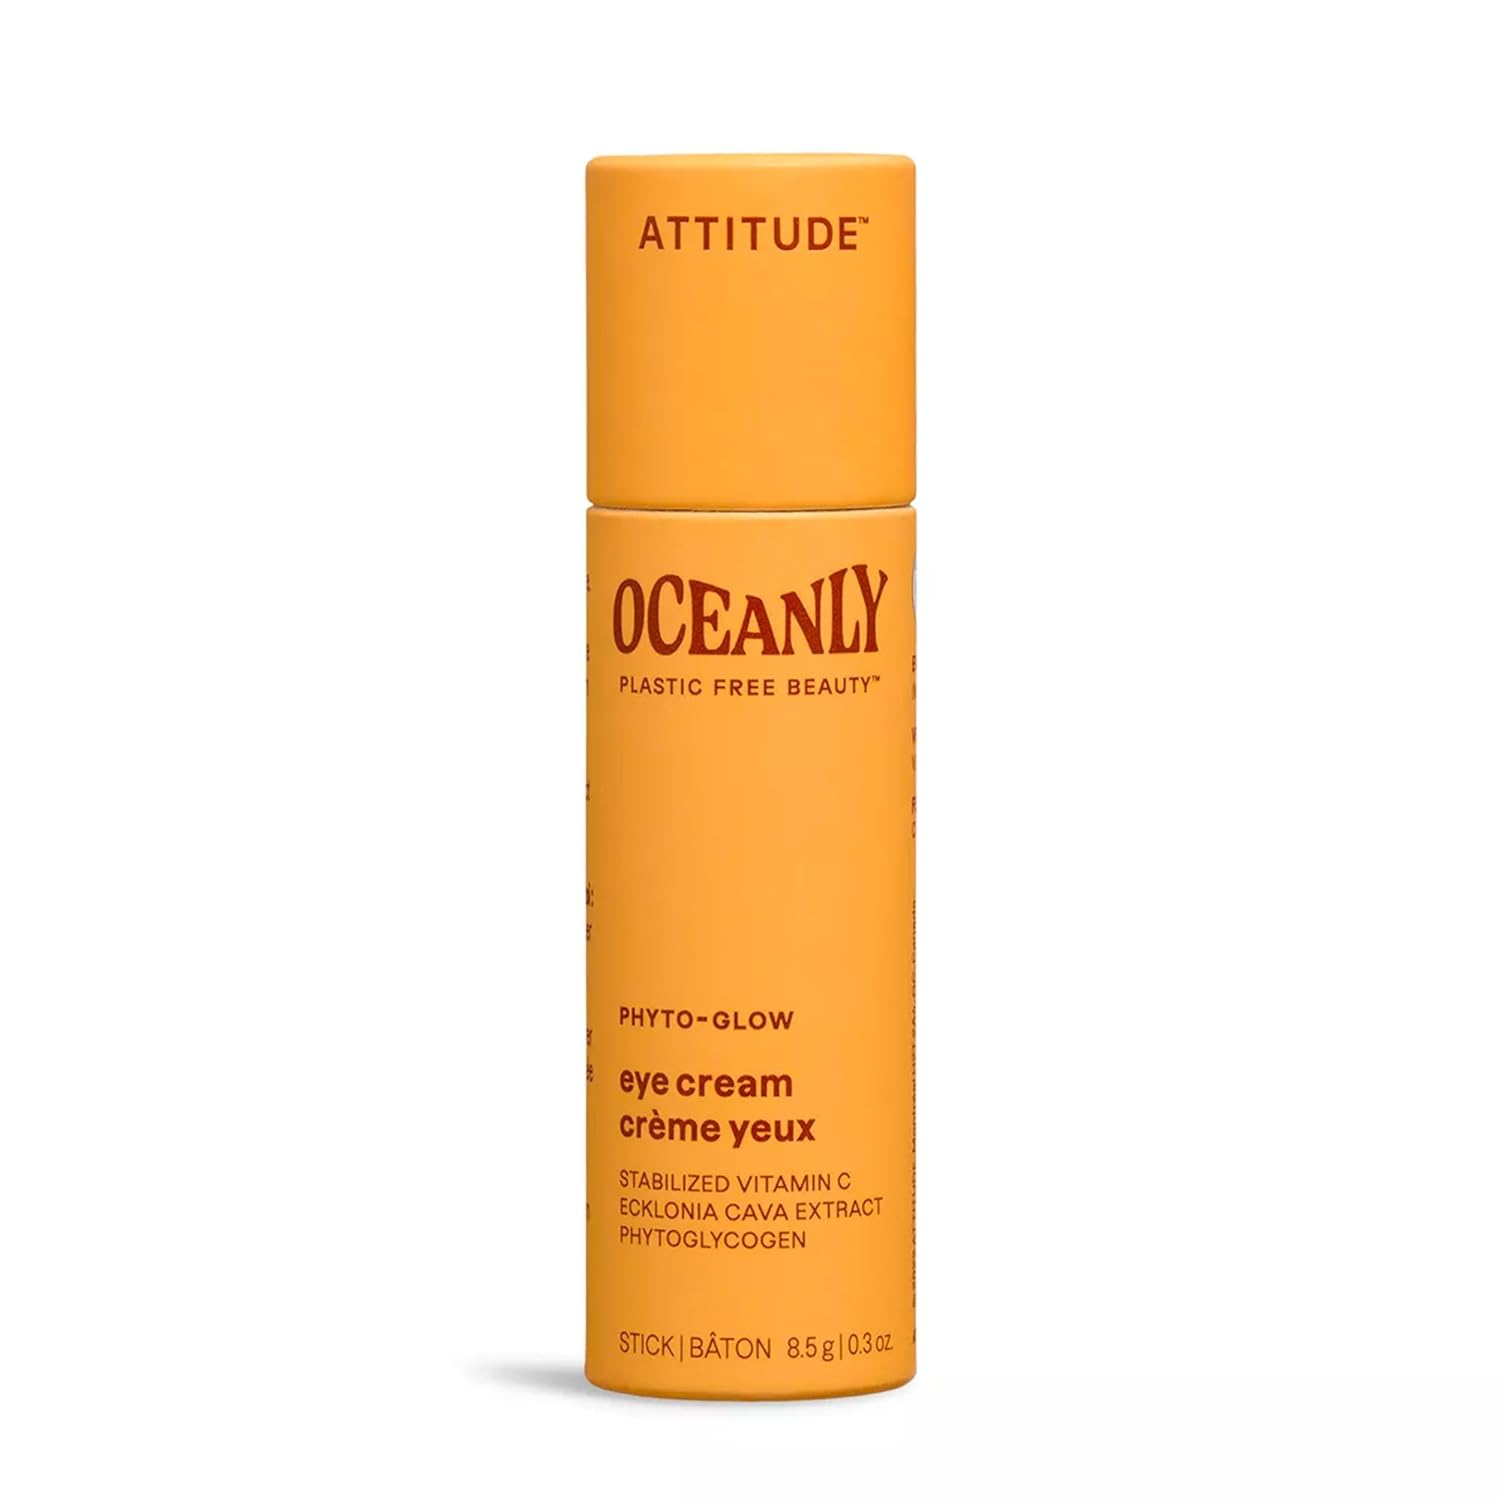 ATTITUDE Oceanly Eye Cream Stick, EWG Verified, Plastic-free, Plant and Mineral-Based Ingredients, Vegan and Cruelty-free Beauty Products, PHYTO GLOW, Unscented, 0.3 Ounce